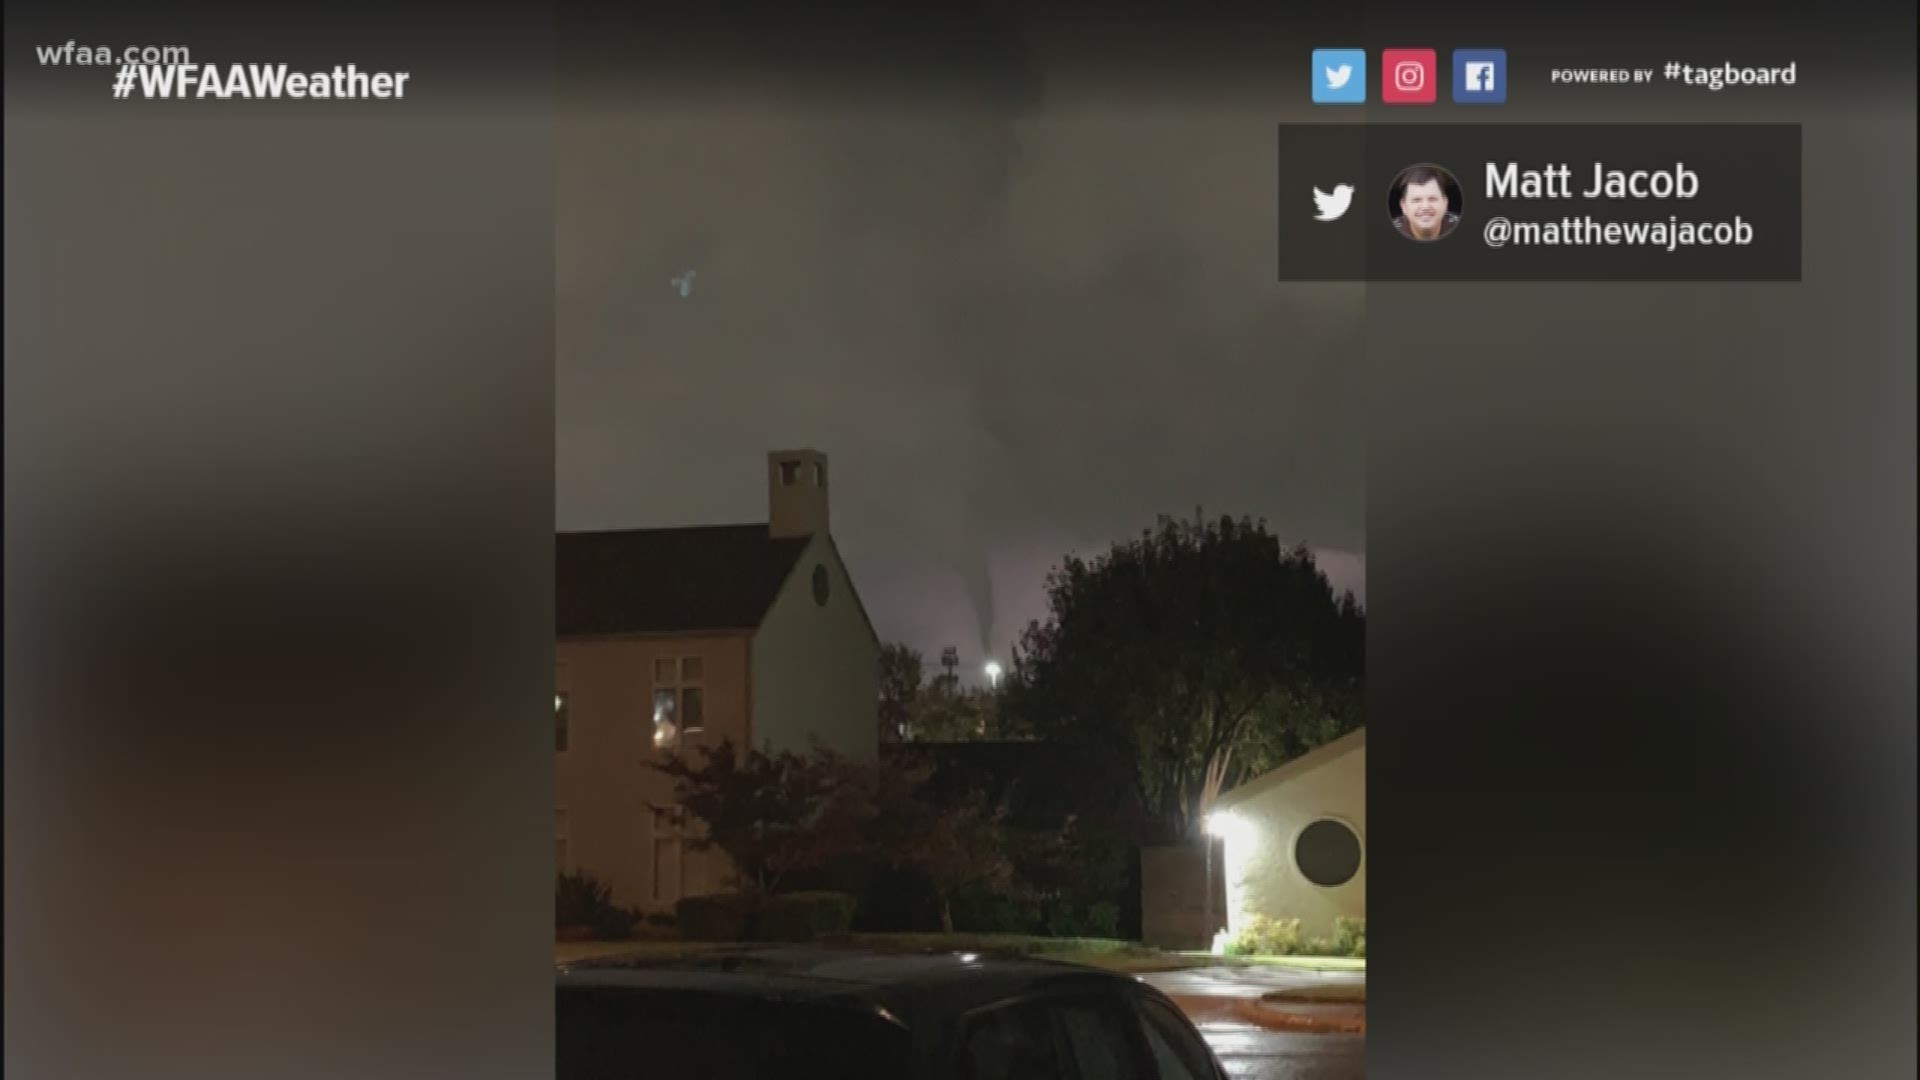 "We saw that funnel cloud, and I was like, 'This is crazy.'"